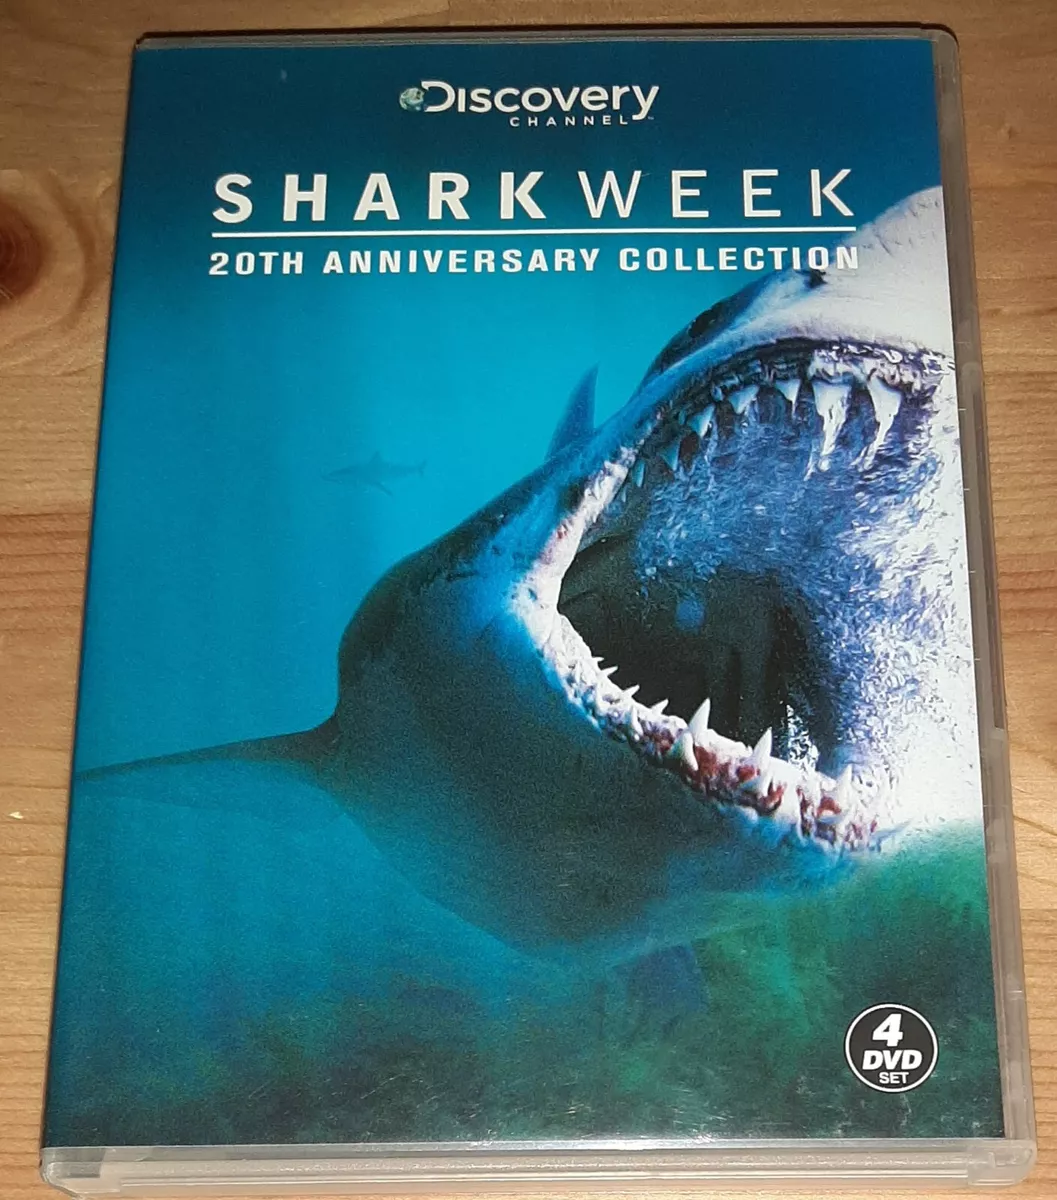 Shark Week: 20th Anniversary Collection (DVD, 4-Disc Set) Discovery Channel